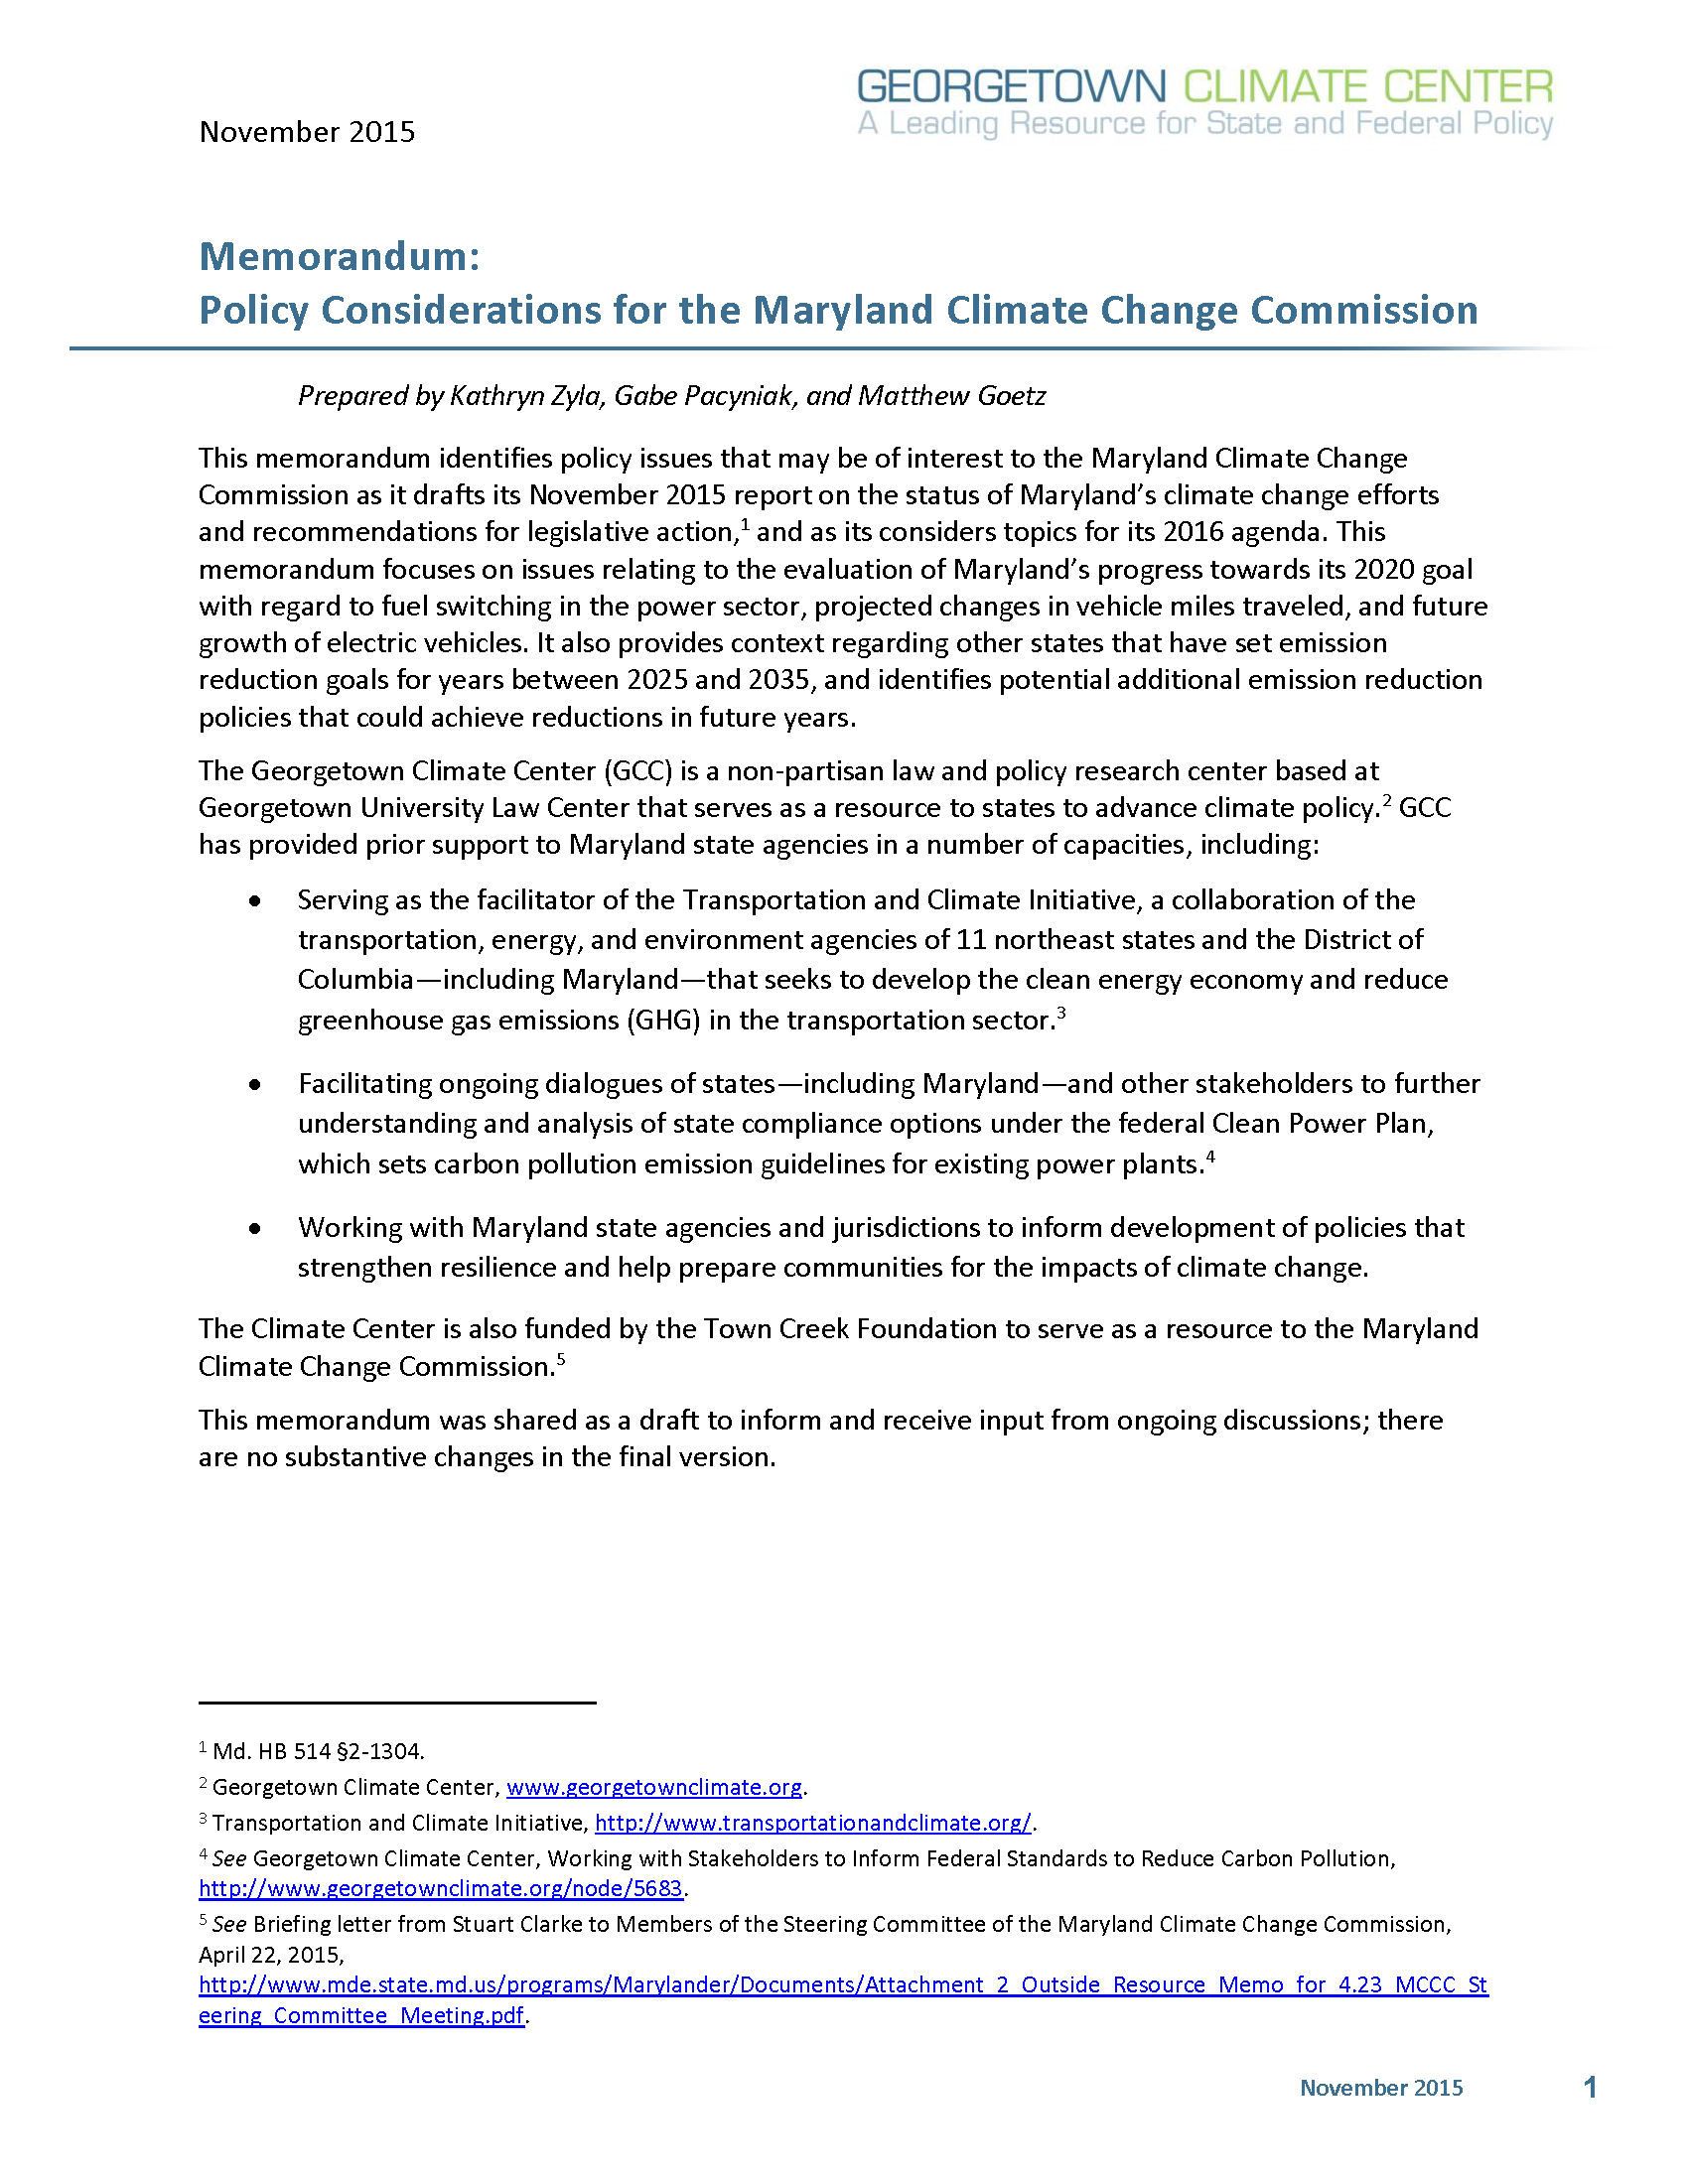 Memorandum: Policy Considerations for the Maryland Climate Change Commission